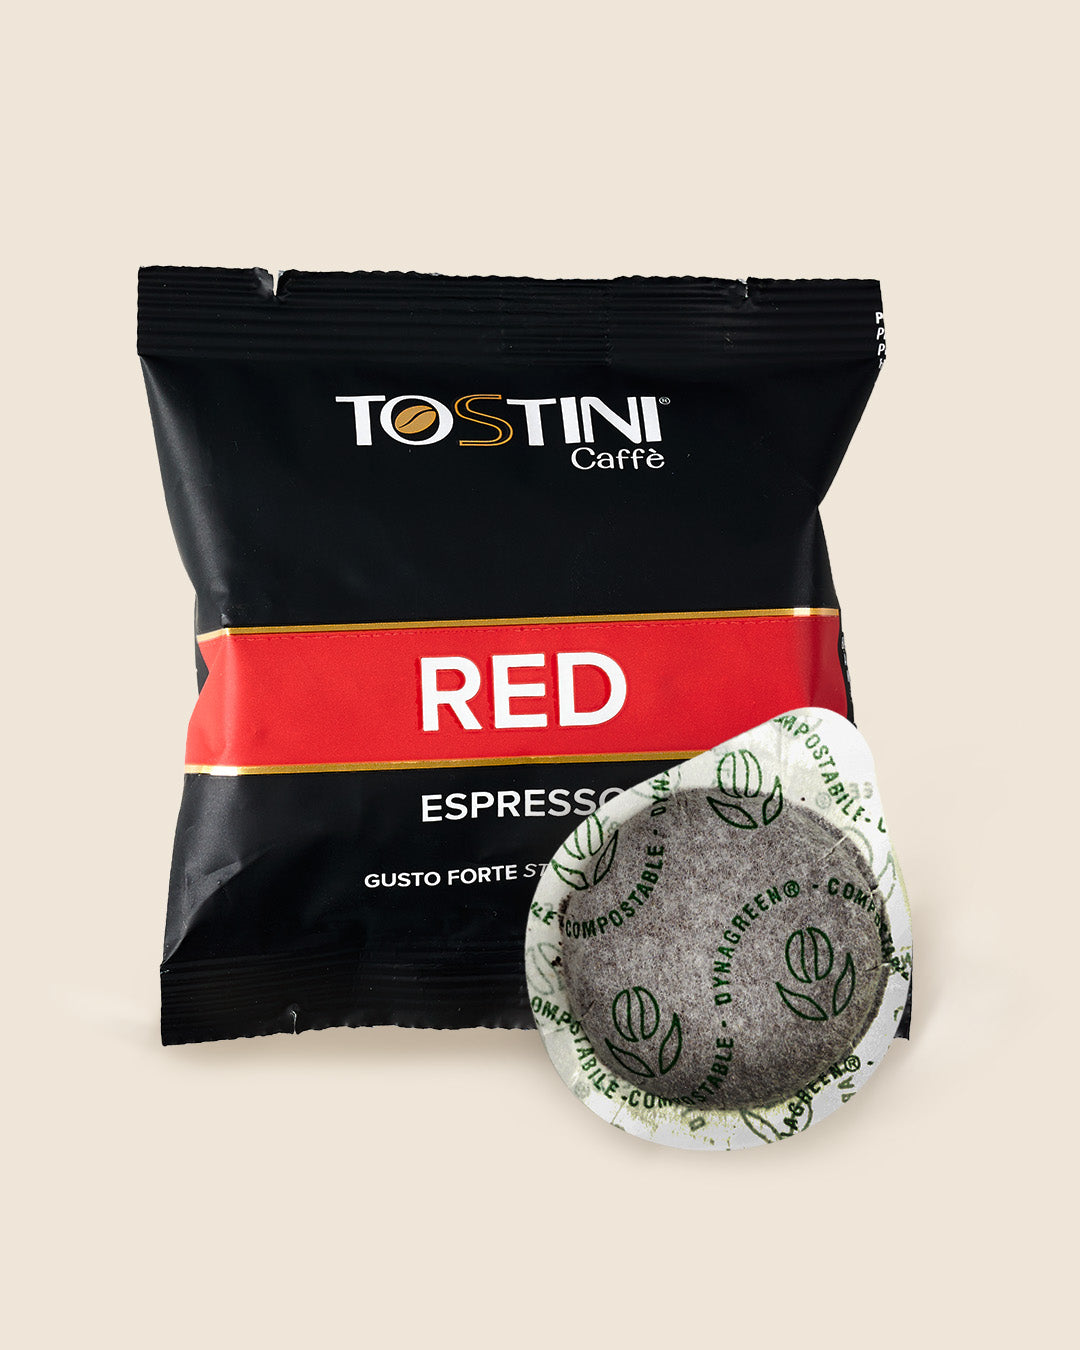 Tostini Red Pods